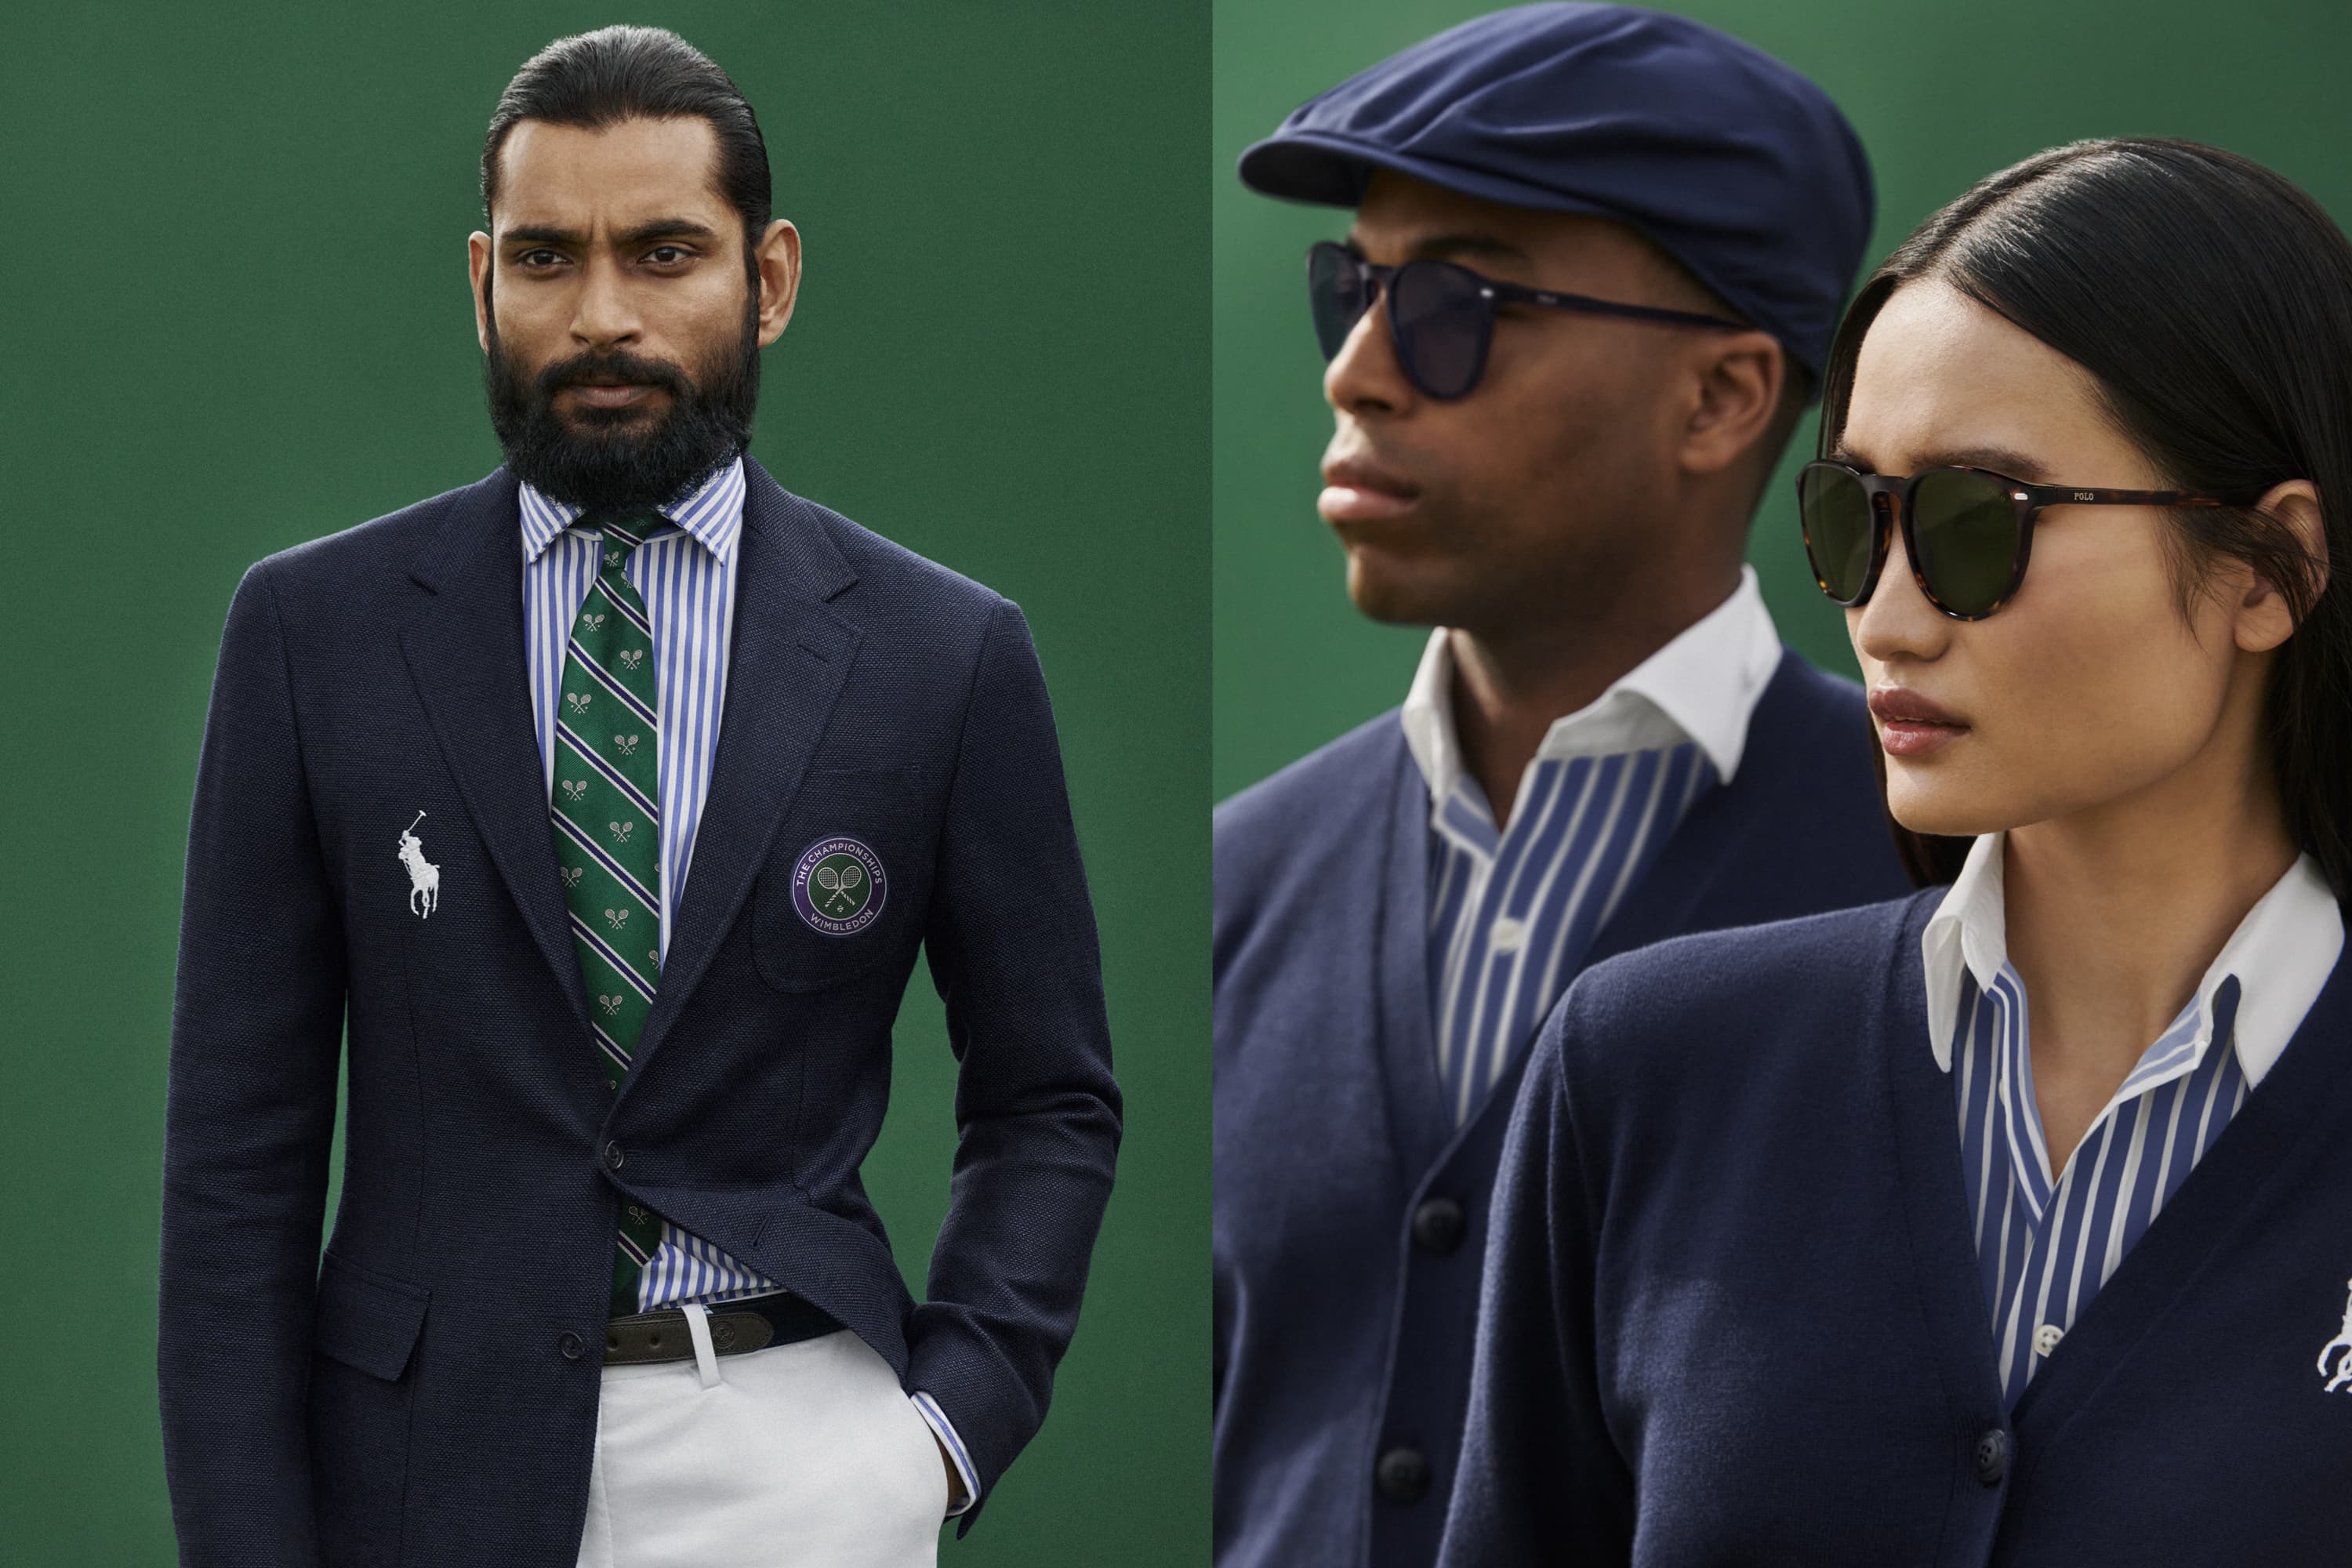 Ralph Lauren on X: To mark our 16 year partnership as the Official  Outfitter of The Championships, Wimbledon, we celebrate the spirit of  sportsmanship through an immersive experience at @Selfridges Stop by